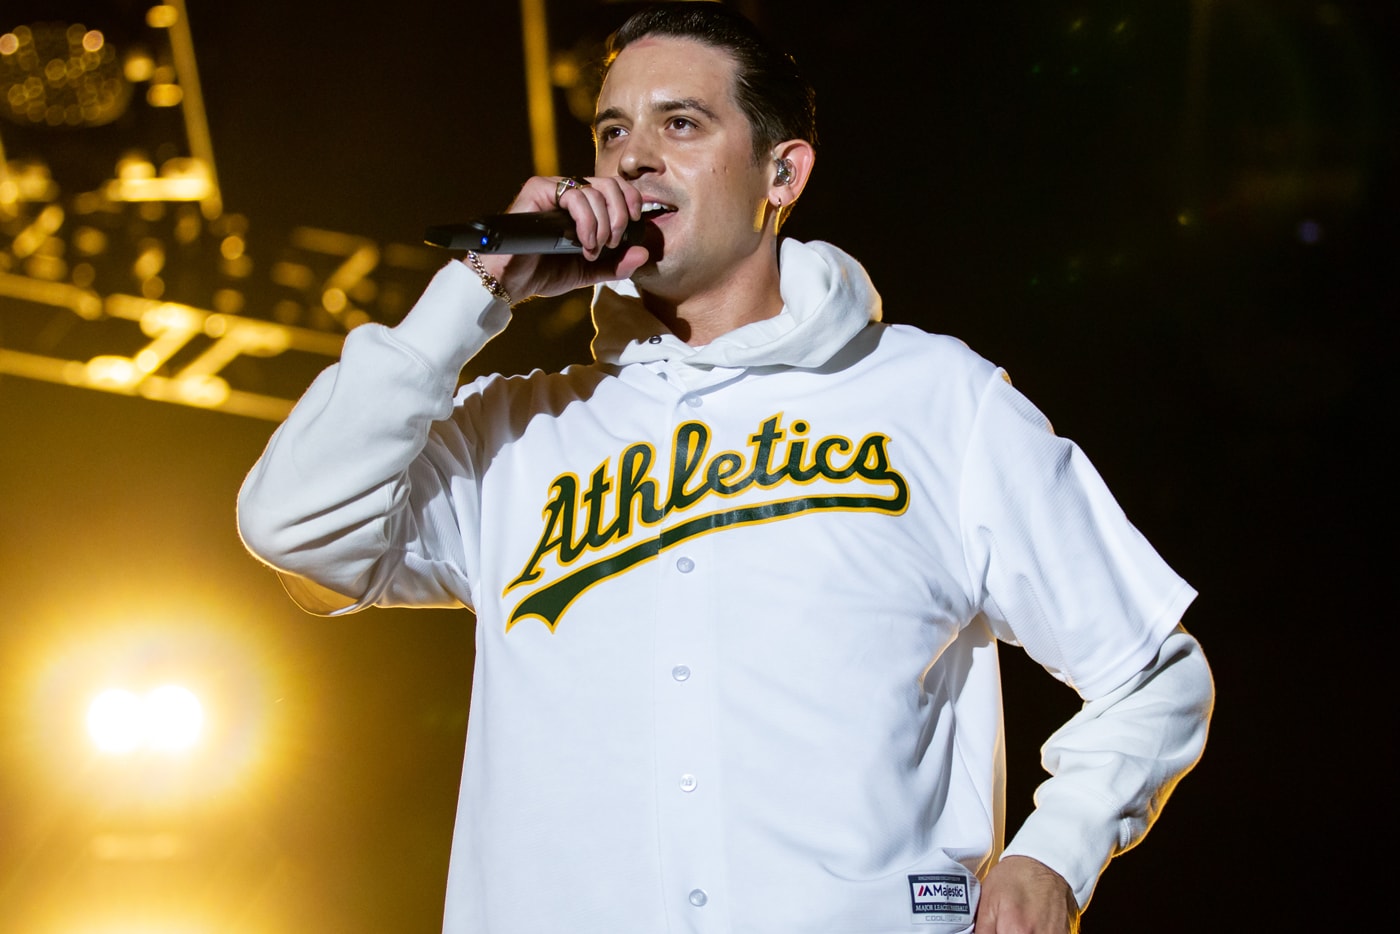 g-eazy-shares-new-single-with-jeremih-saw-it-coming